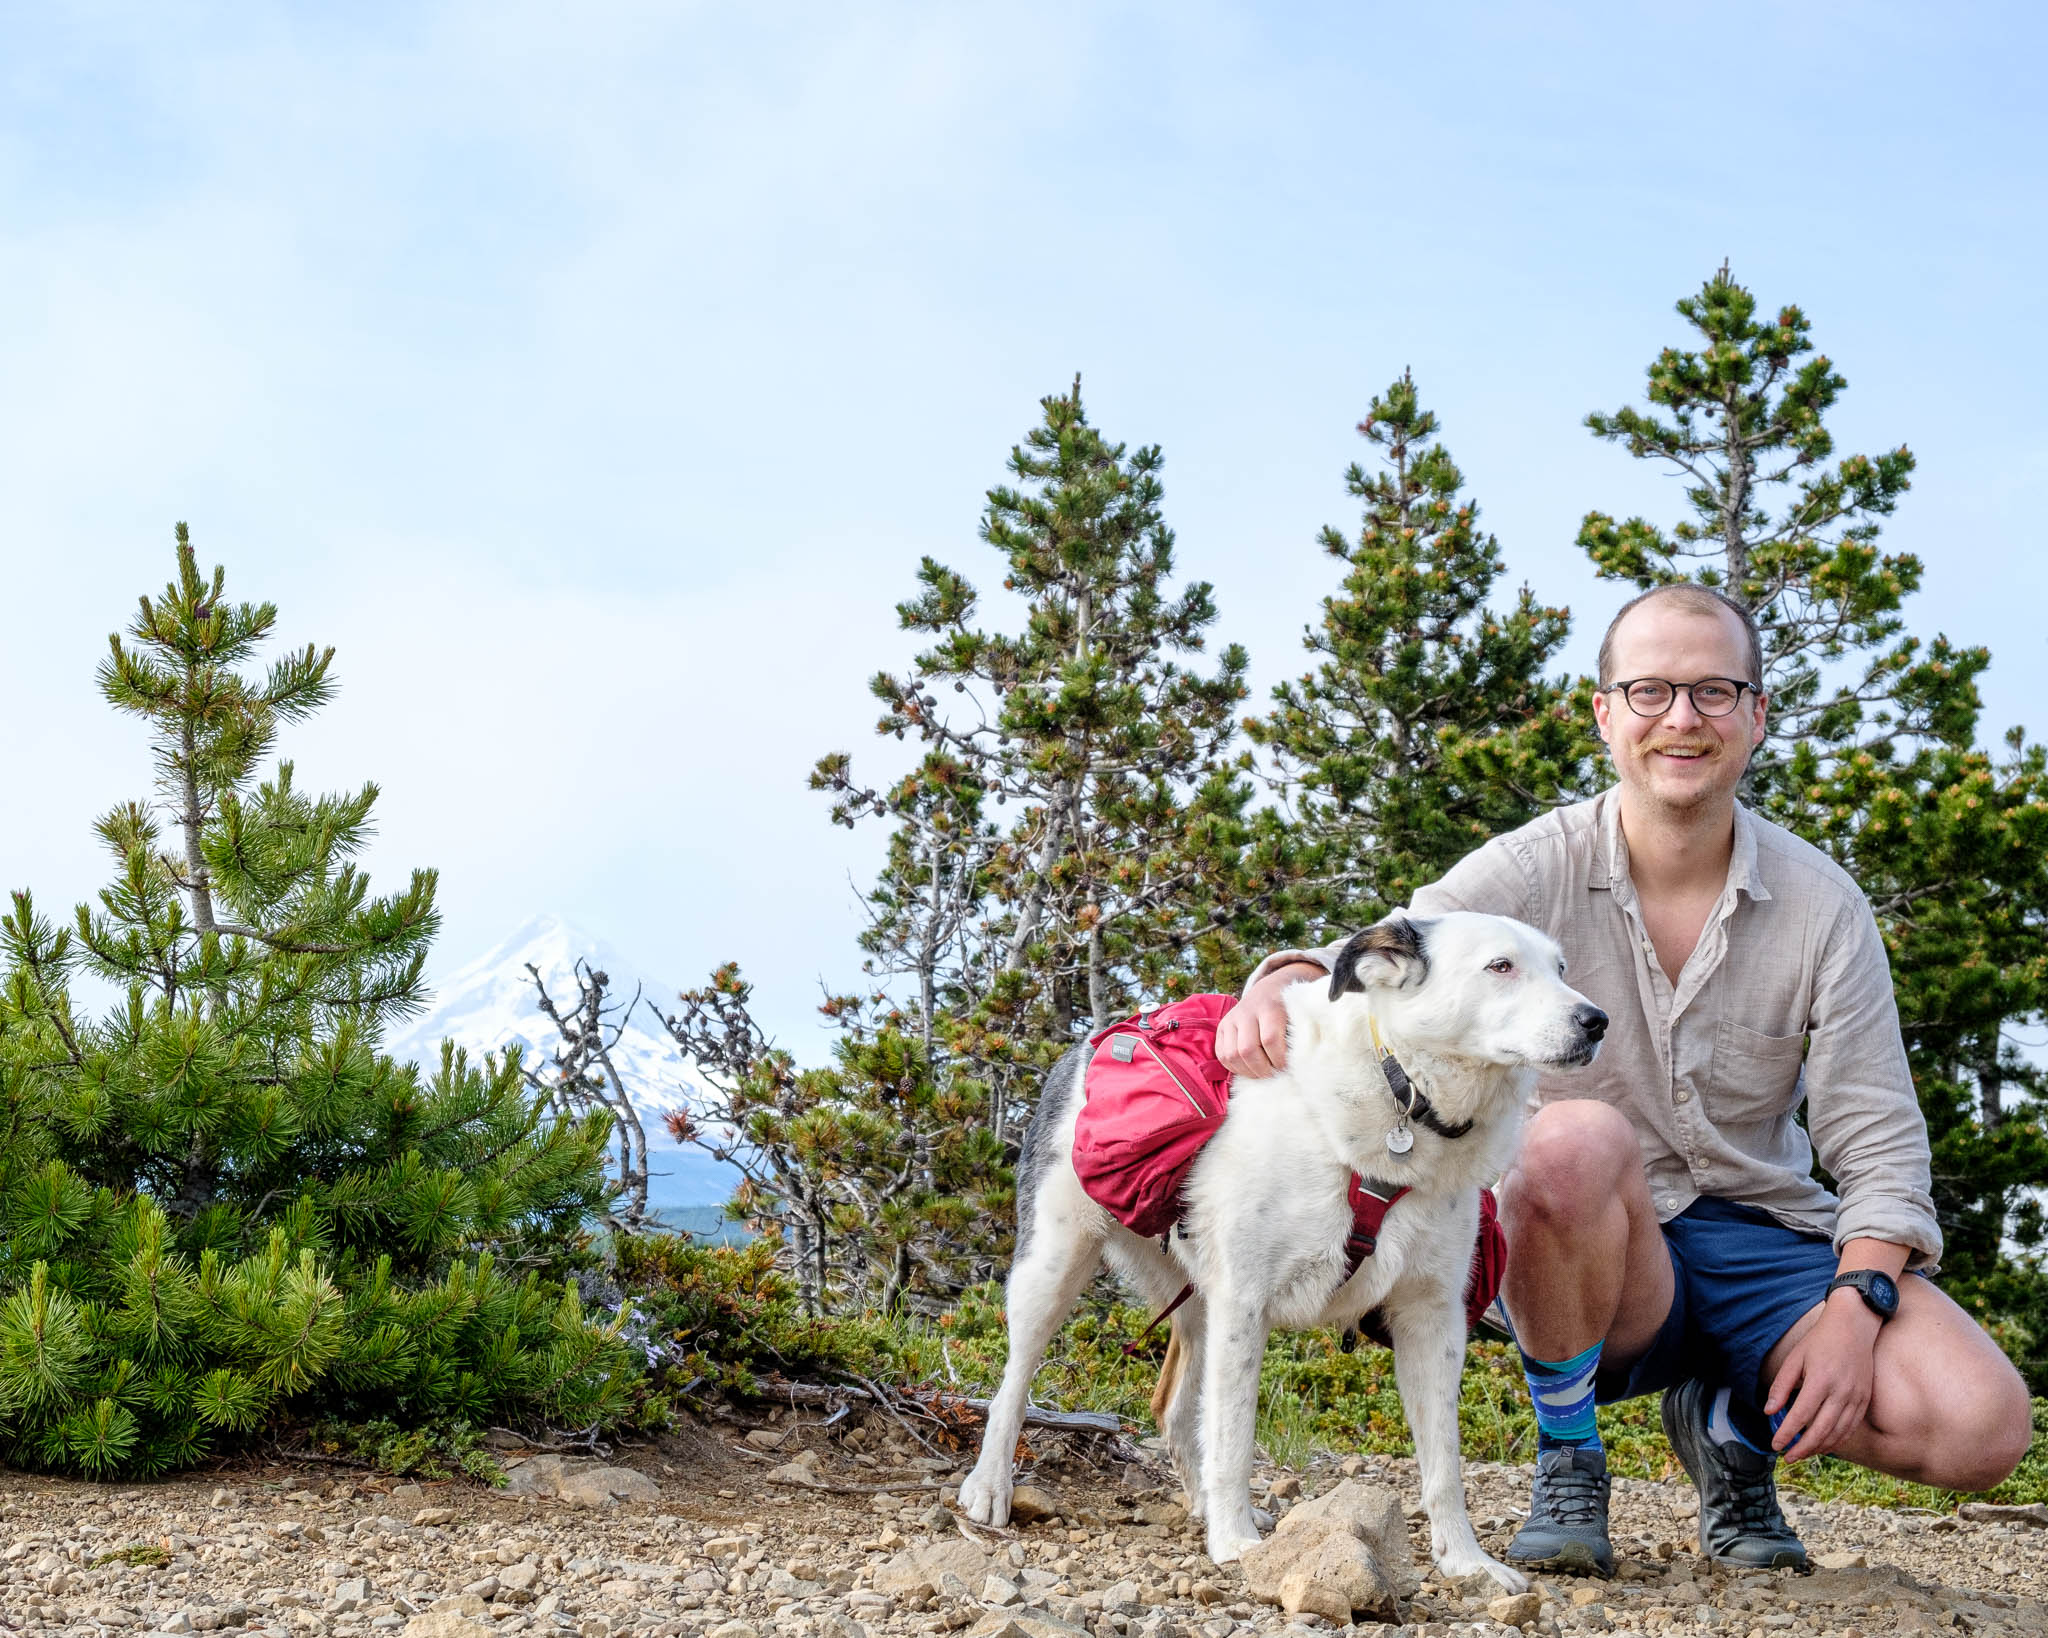 A photo of the author, Kevin, and his dog Reef posing in front of Wy'East.